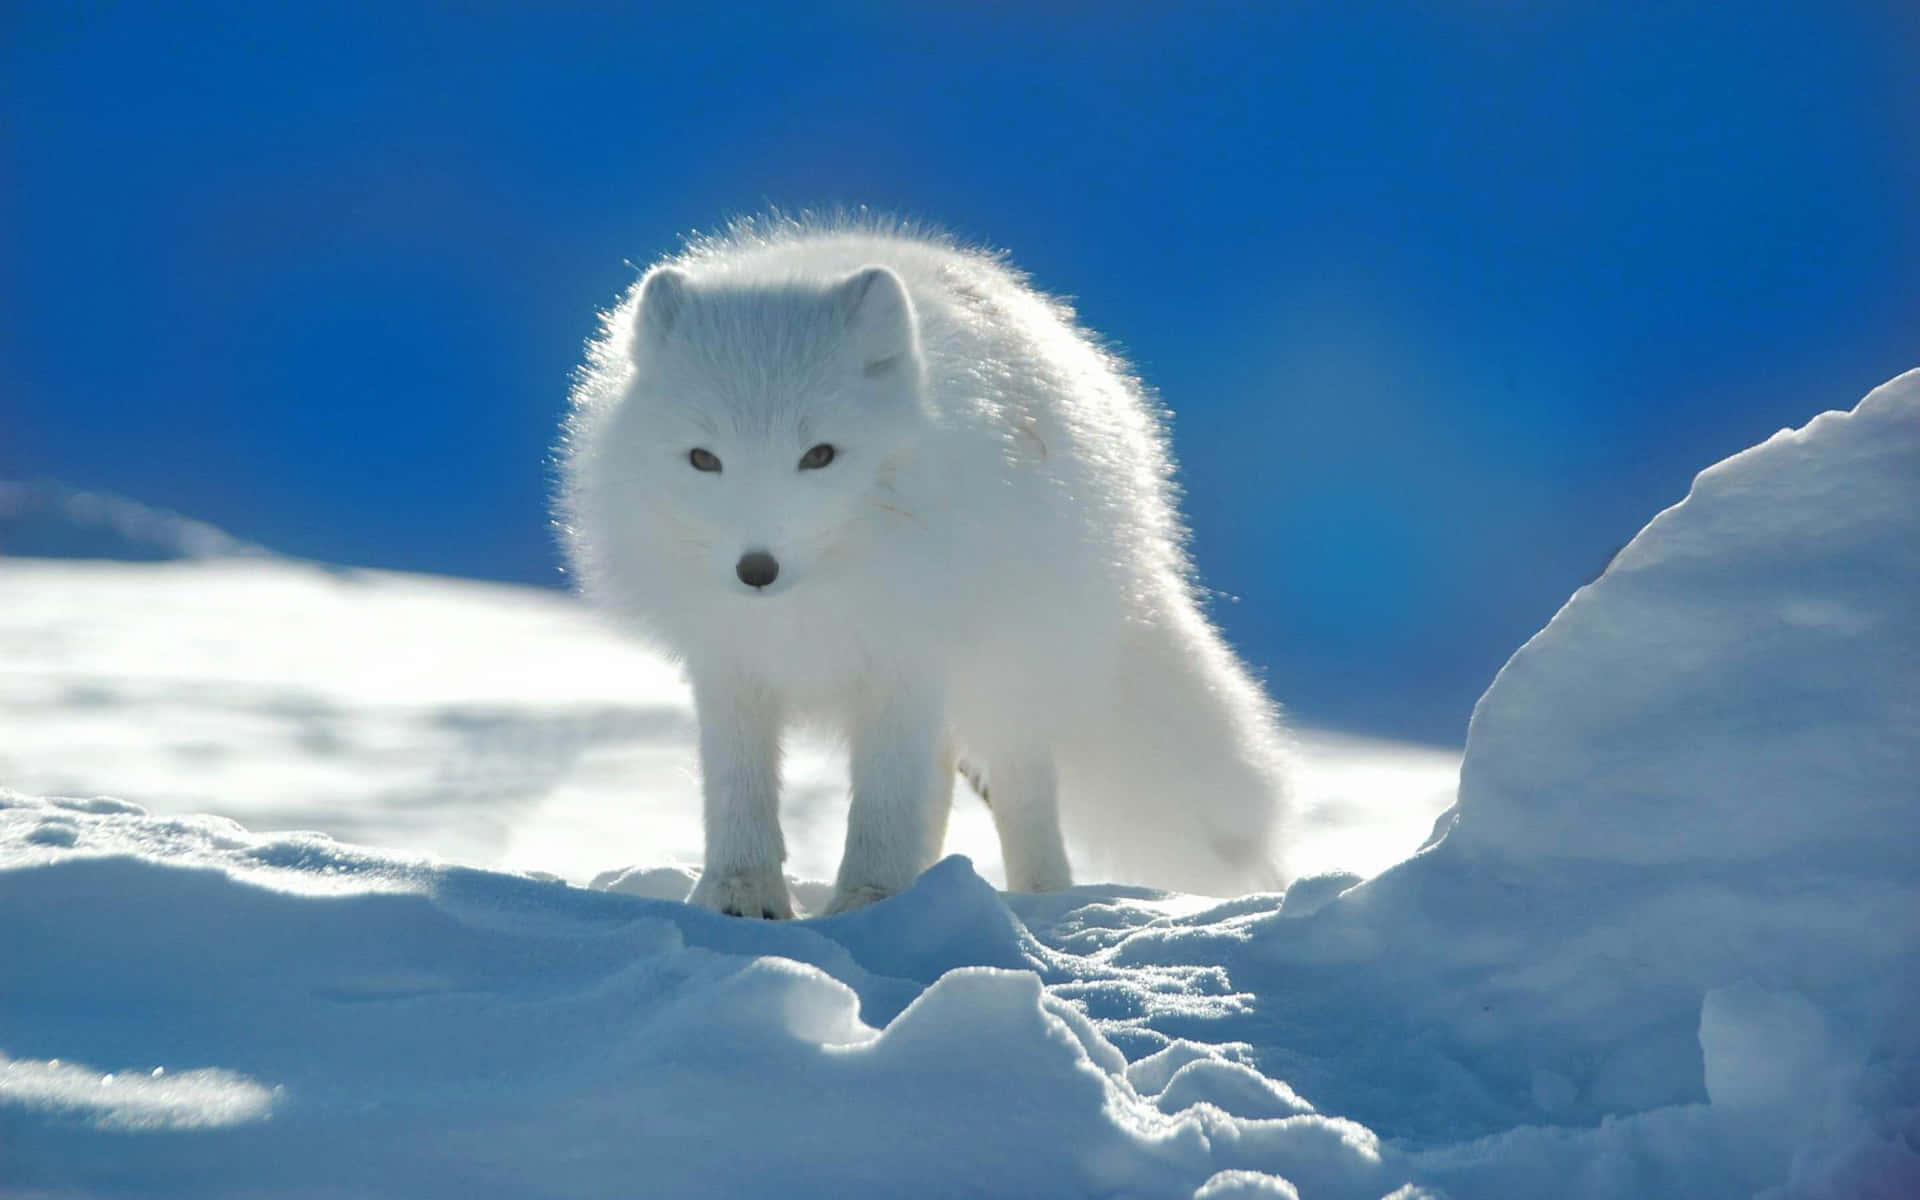 “Take a close look at the dense white fur of this majestic Arctic Fox”